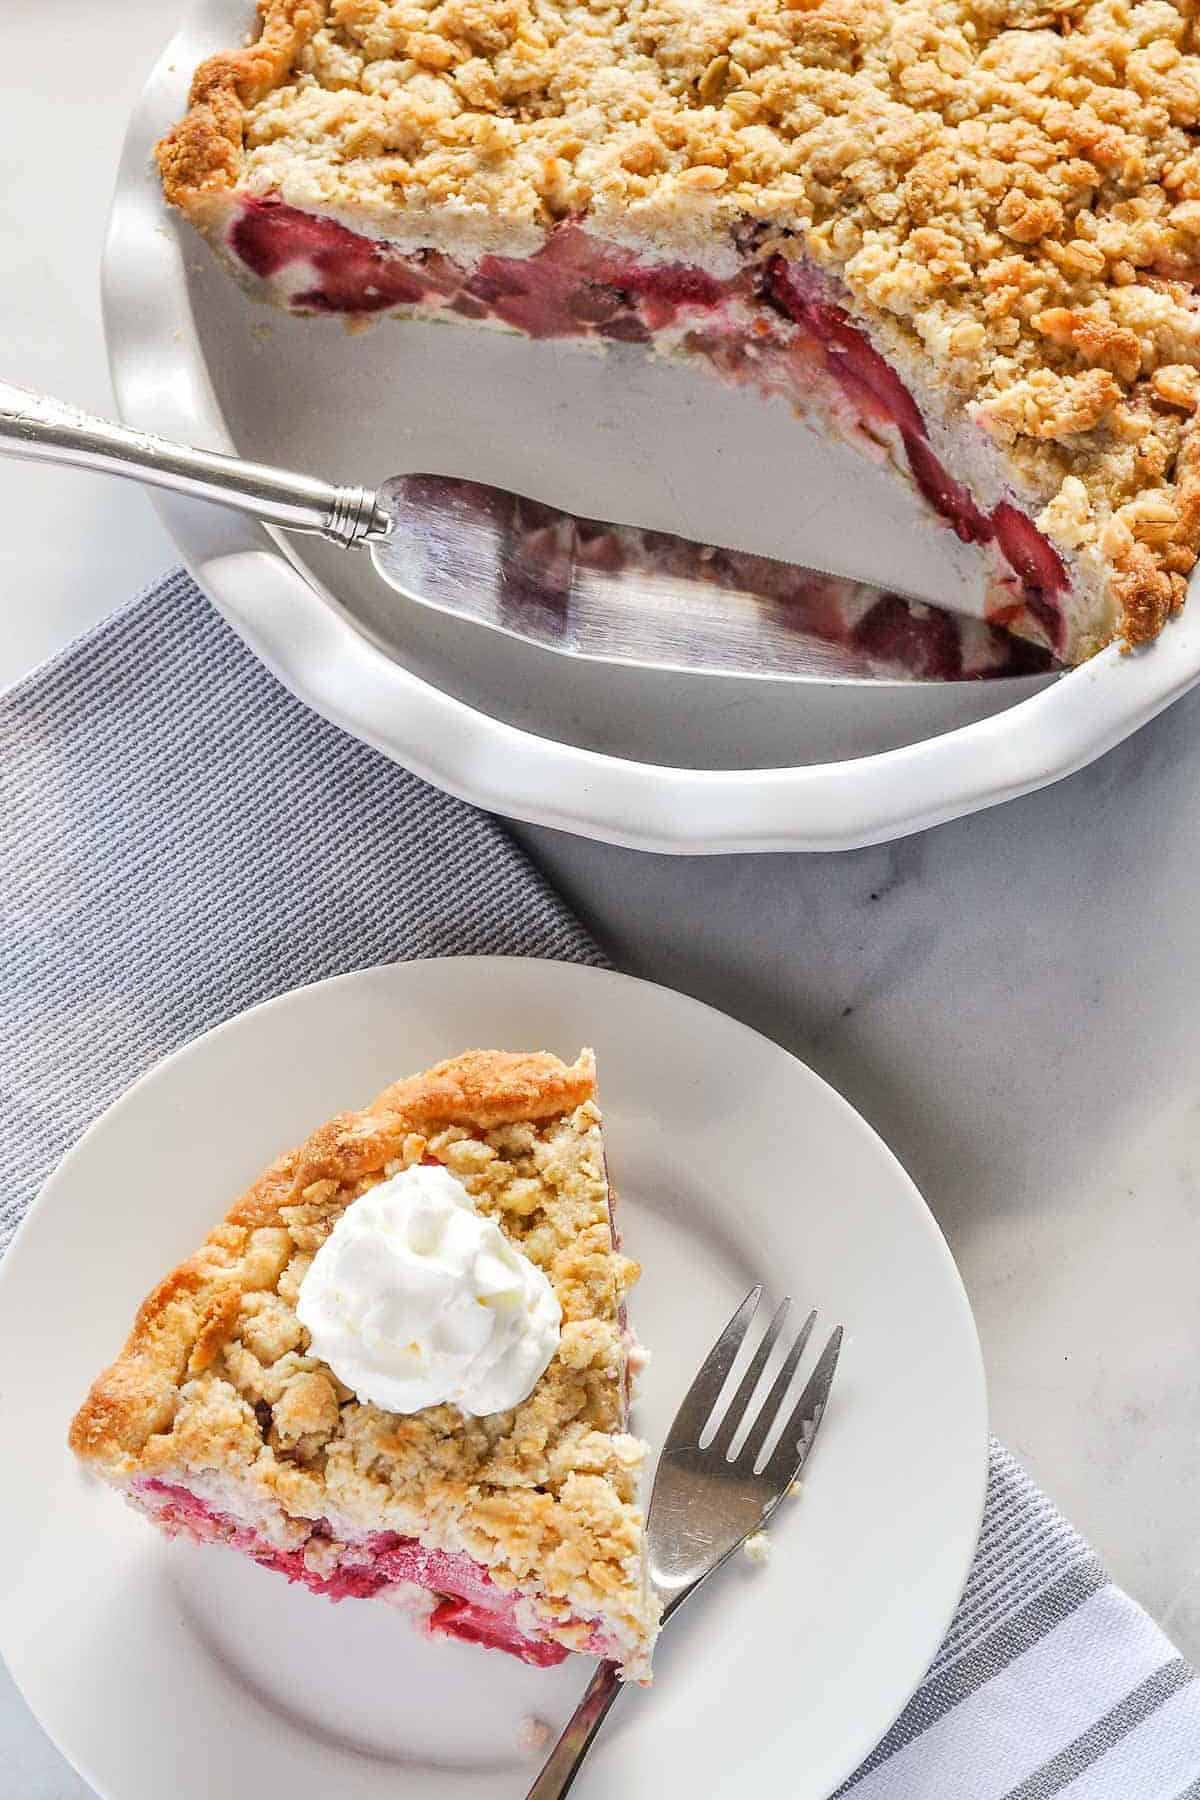 A slice of strawberry rhubarb crumble pie.